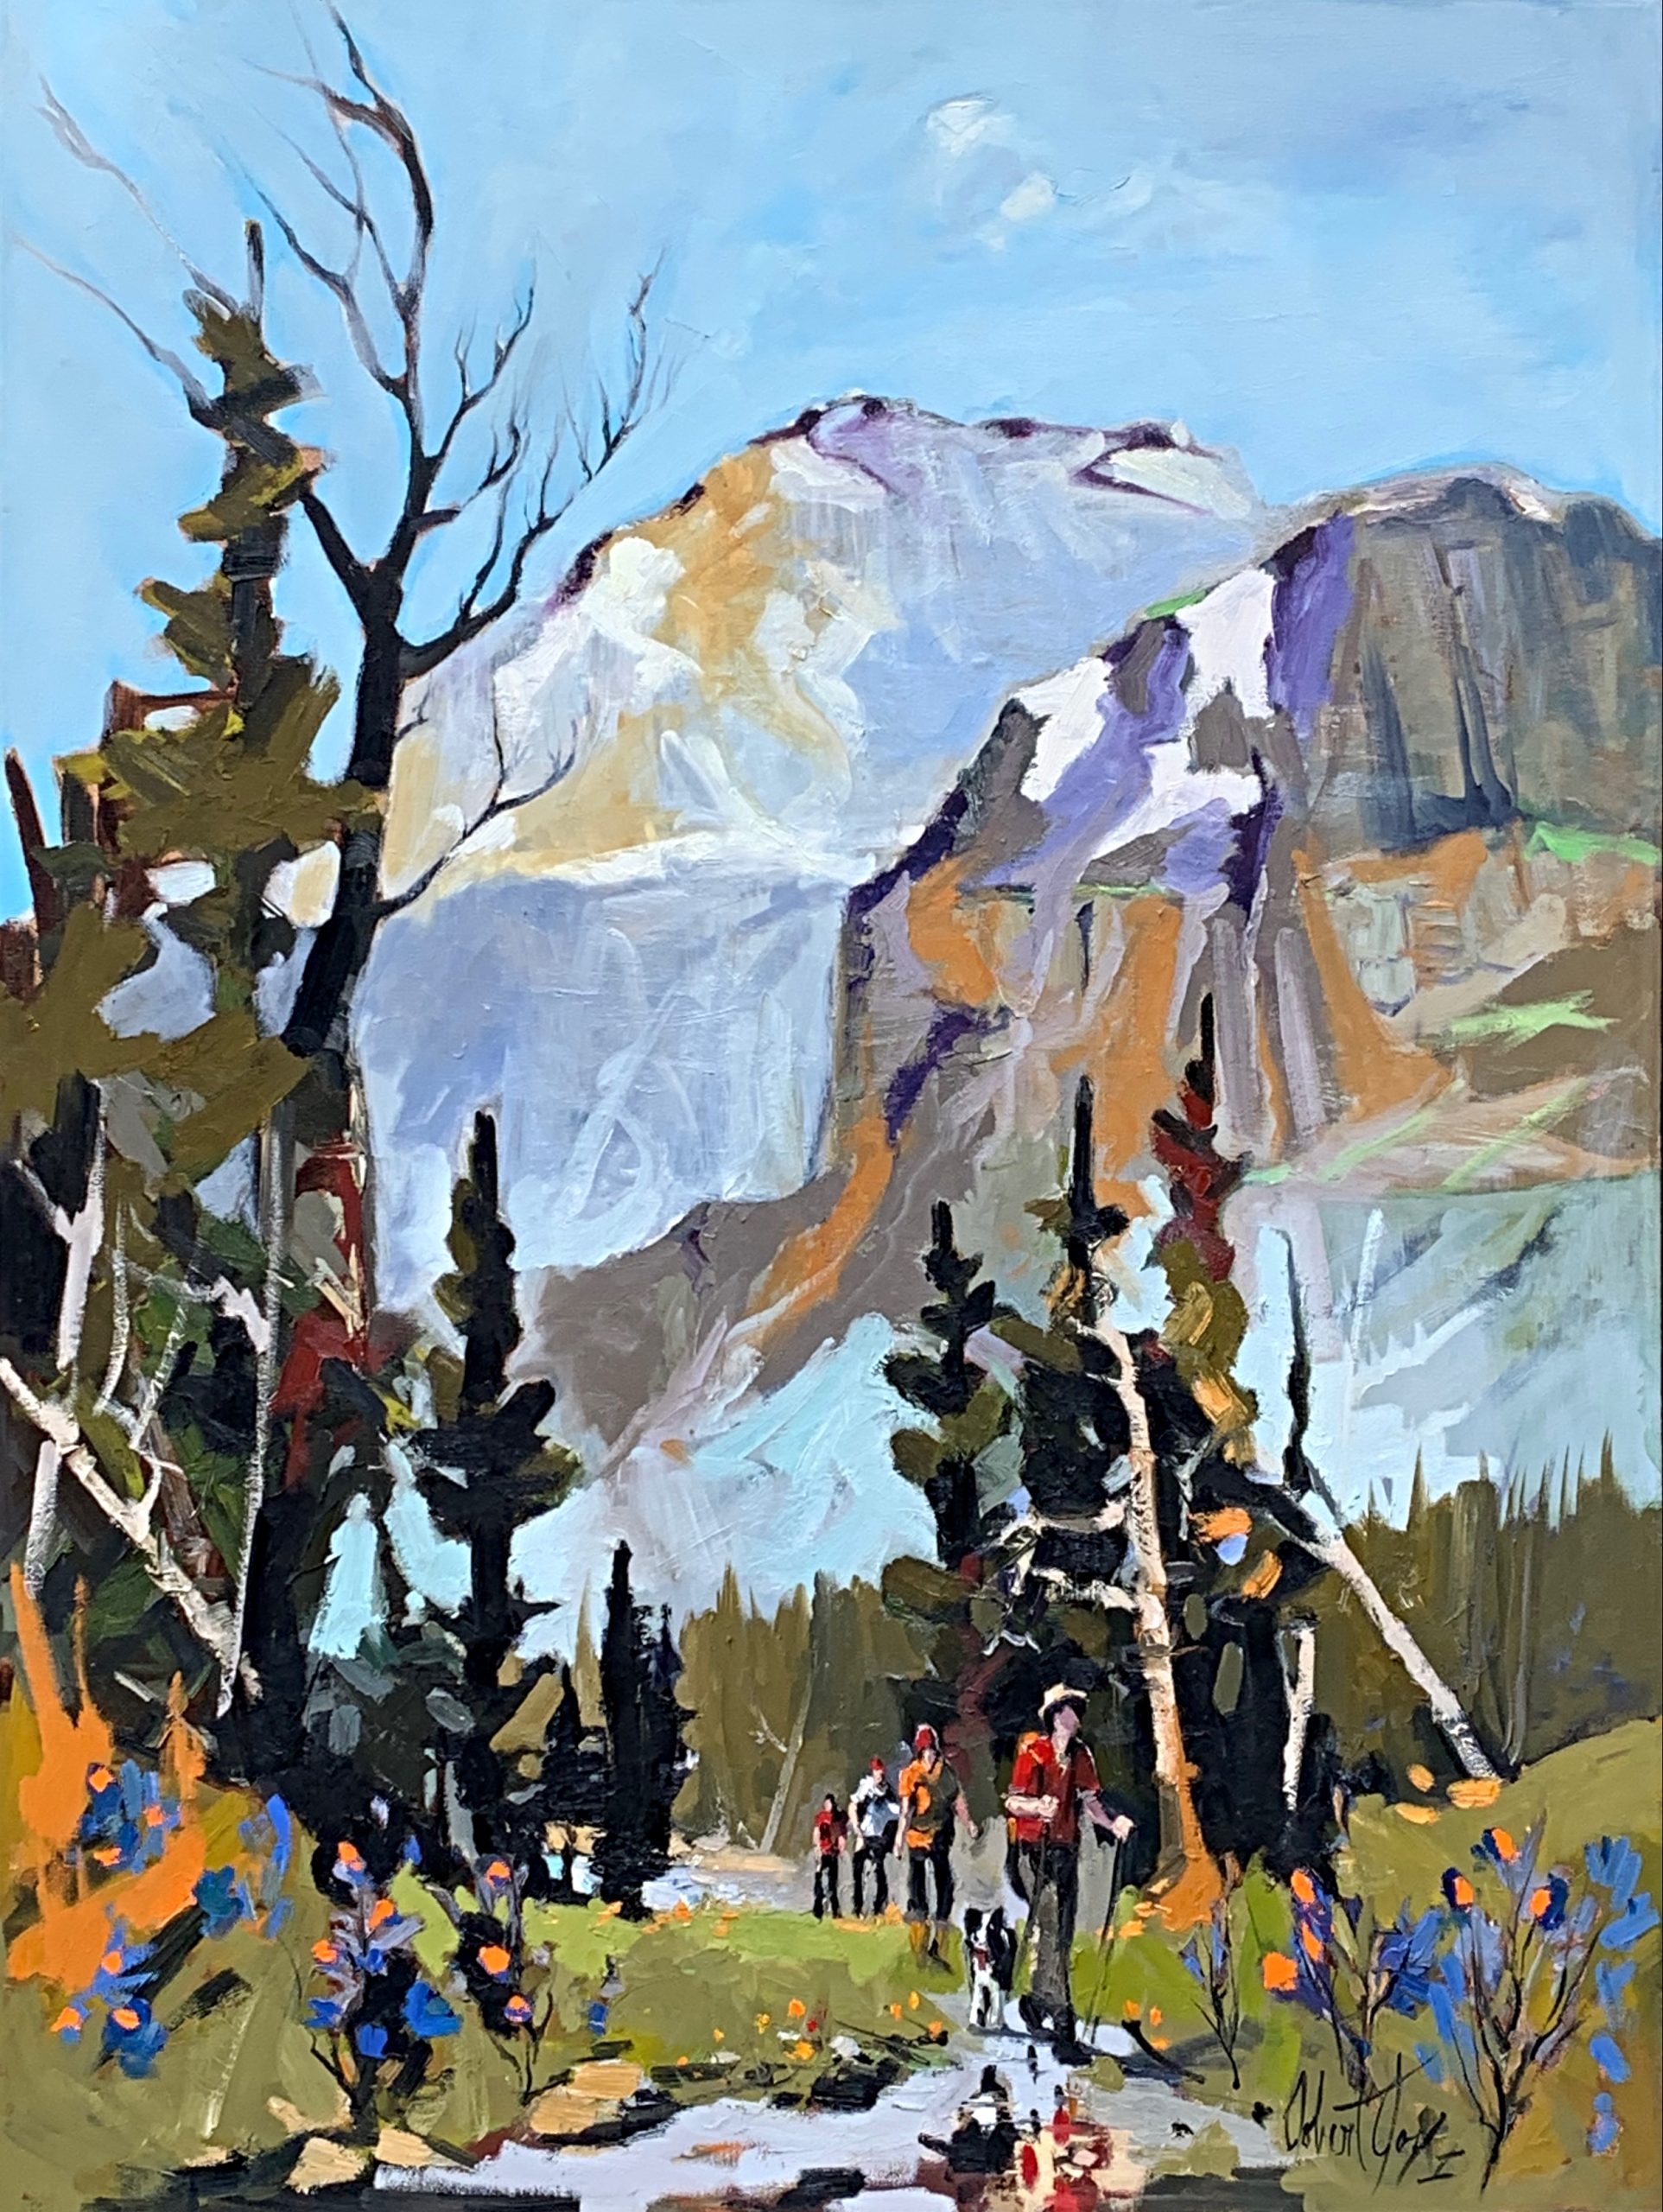 L'aventure, acrylic hiking painting by Robert Roy | Effusion Art Gallery + Cast Glass Studio, Invermere BC